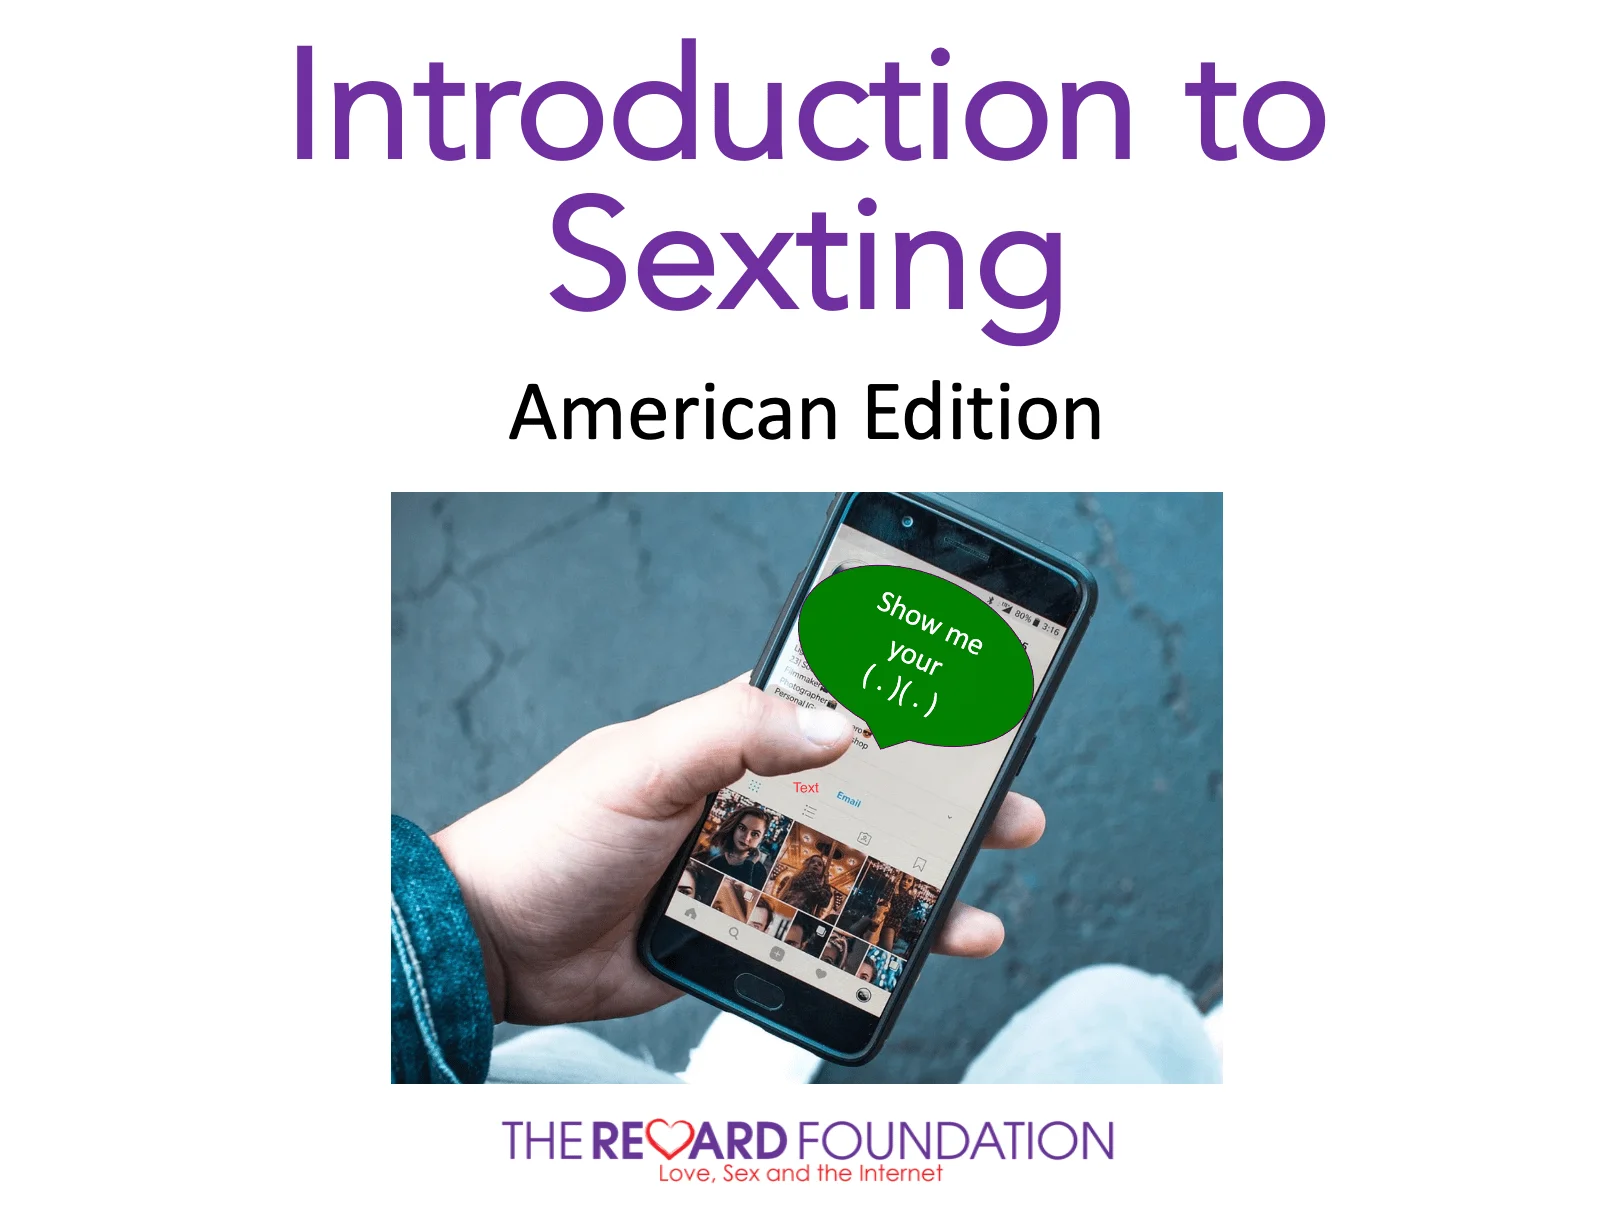 Austrelian Musterbing Sex Imag - Introduction to Sexting, American Edition - The Reward Foundation